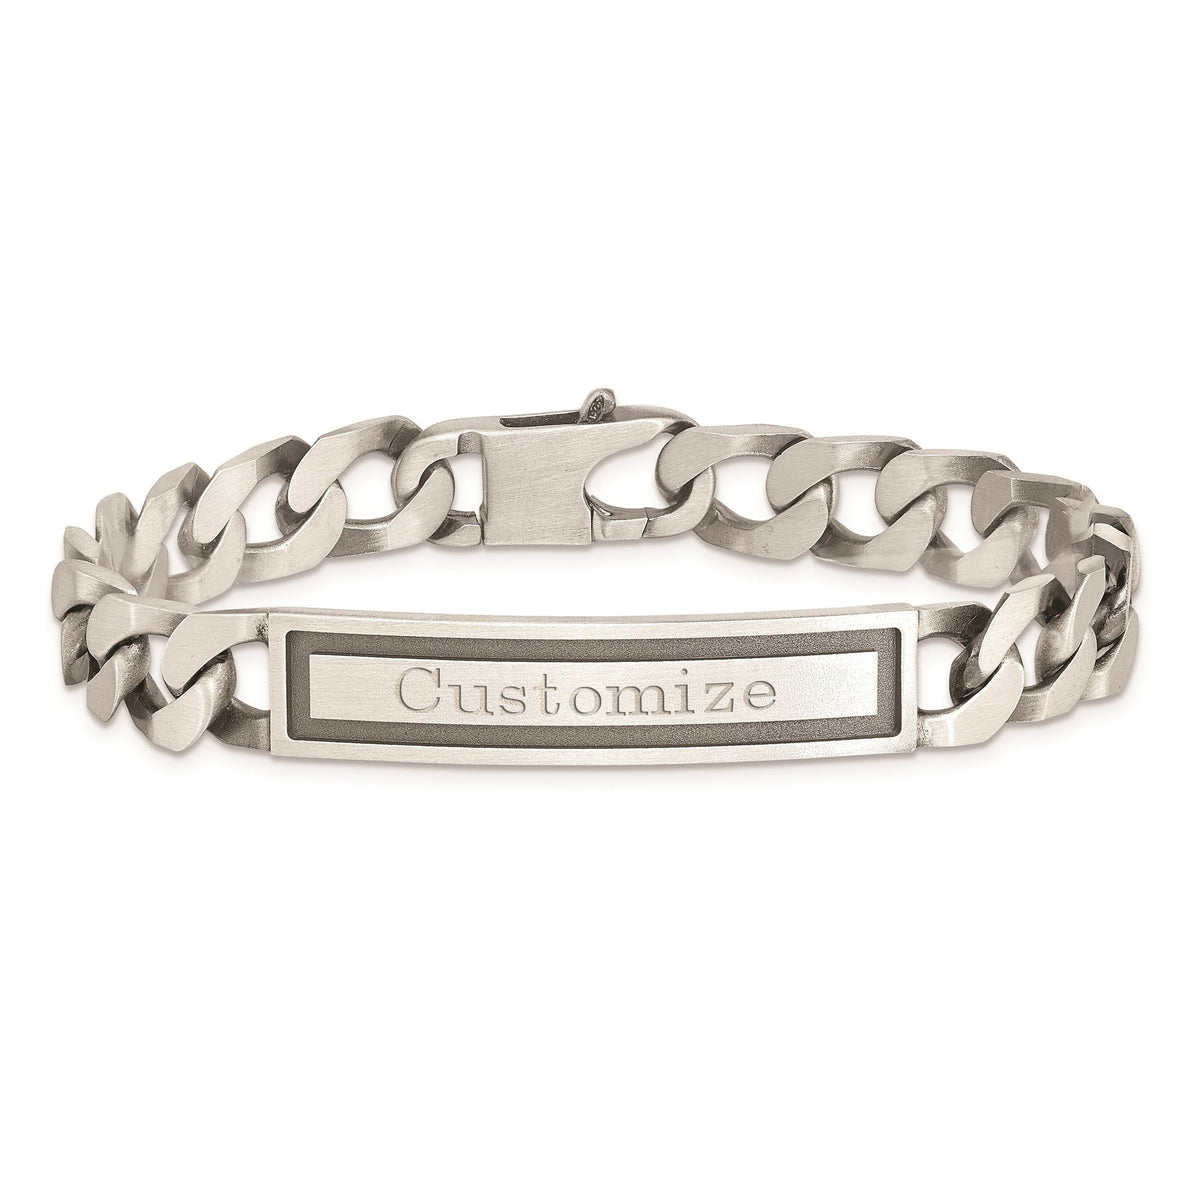 Mens Solid Antiqued Sterling Silver Personalized ID Cuban / Curb Bracelet  7.5 inches or 8 inches Front & Back Engraving - Gift Box Included